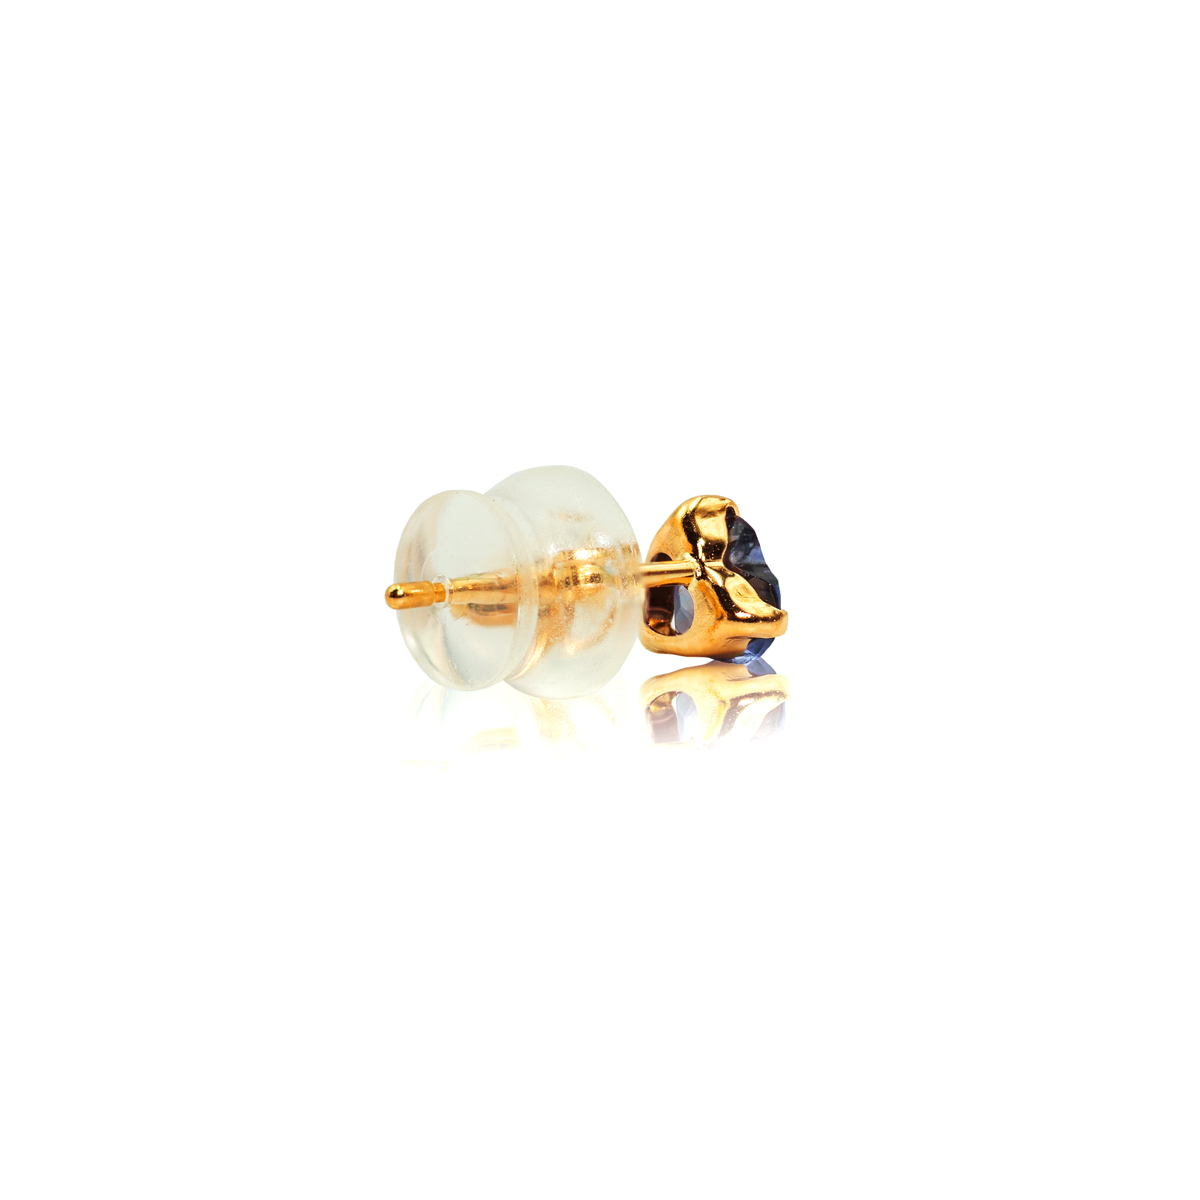 Heart Shaped Stud Earrings in 18k Yellow Gold with Iolite